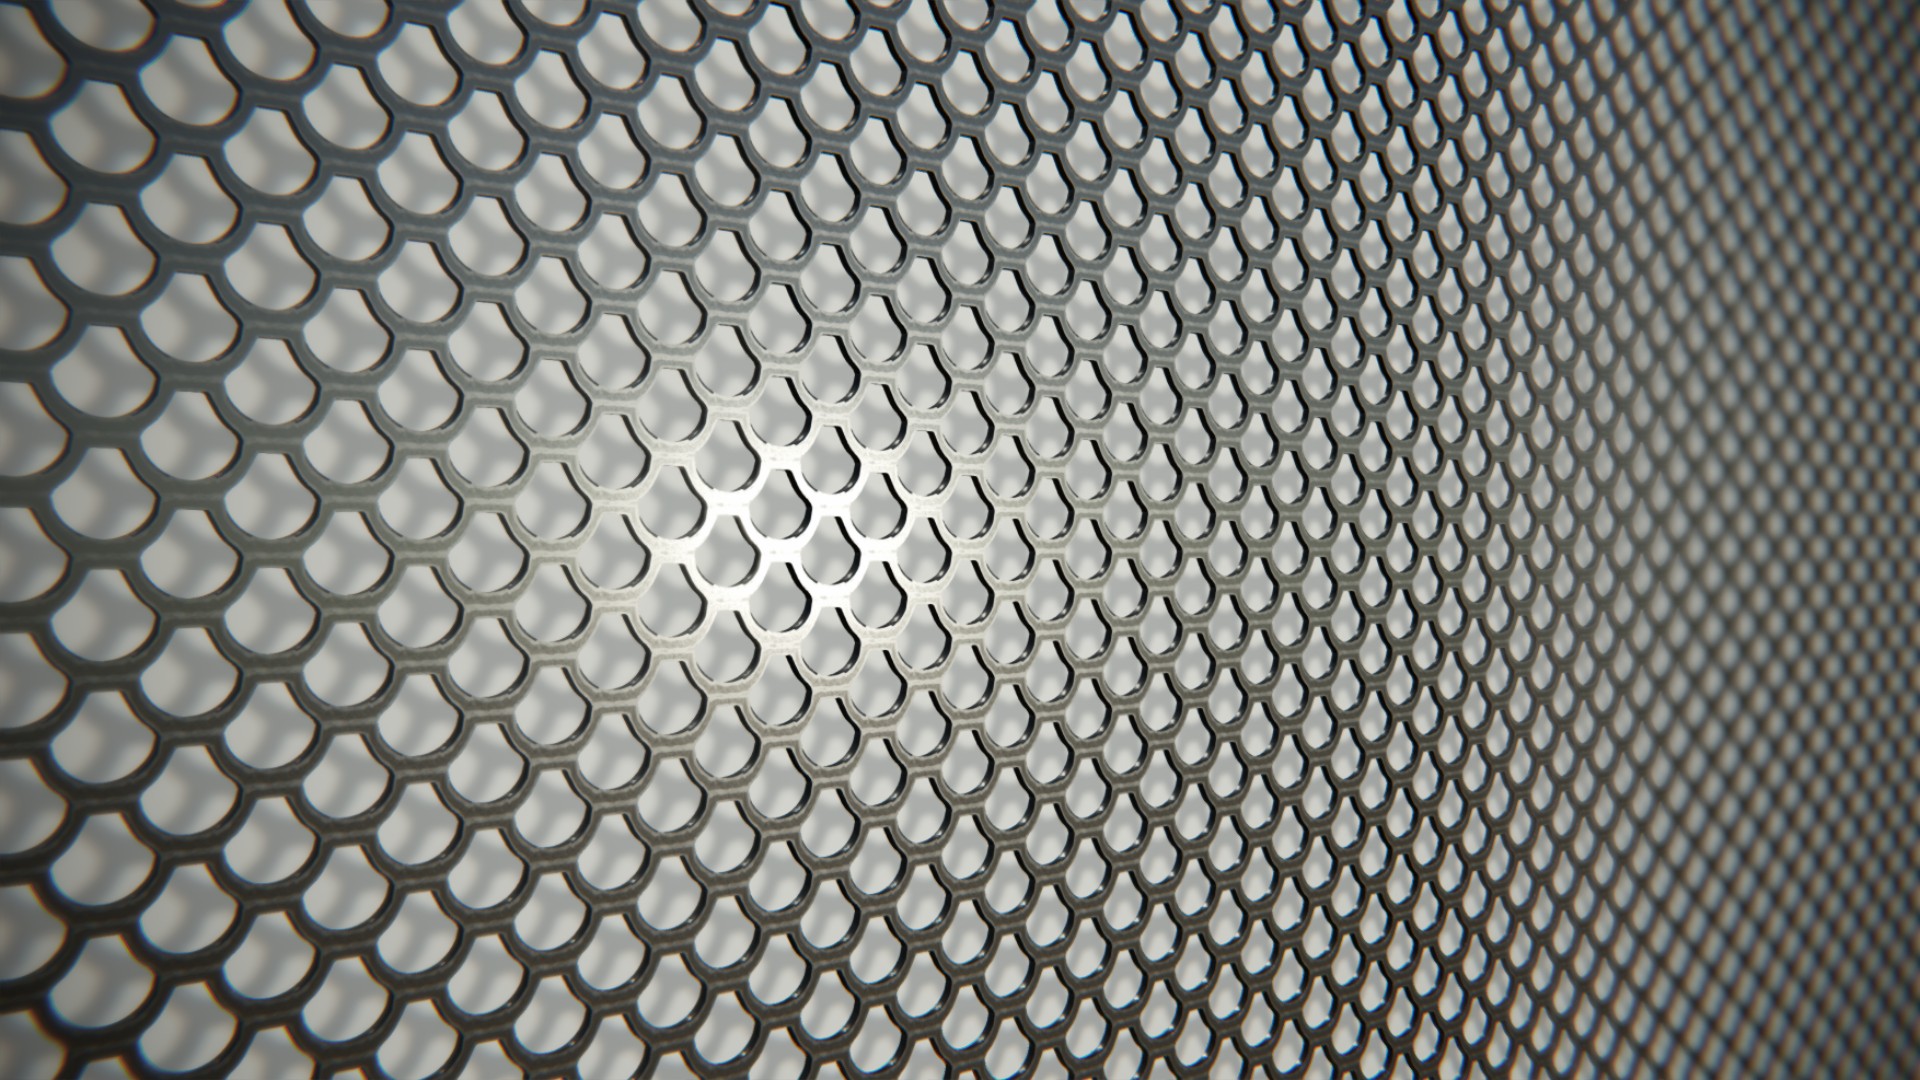 Experf – an alternative to perforated metal - News